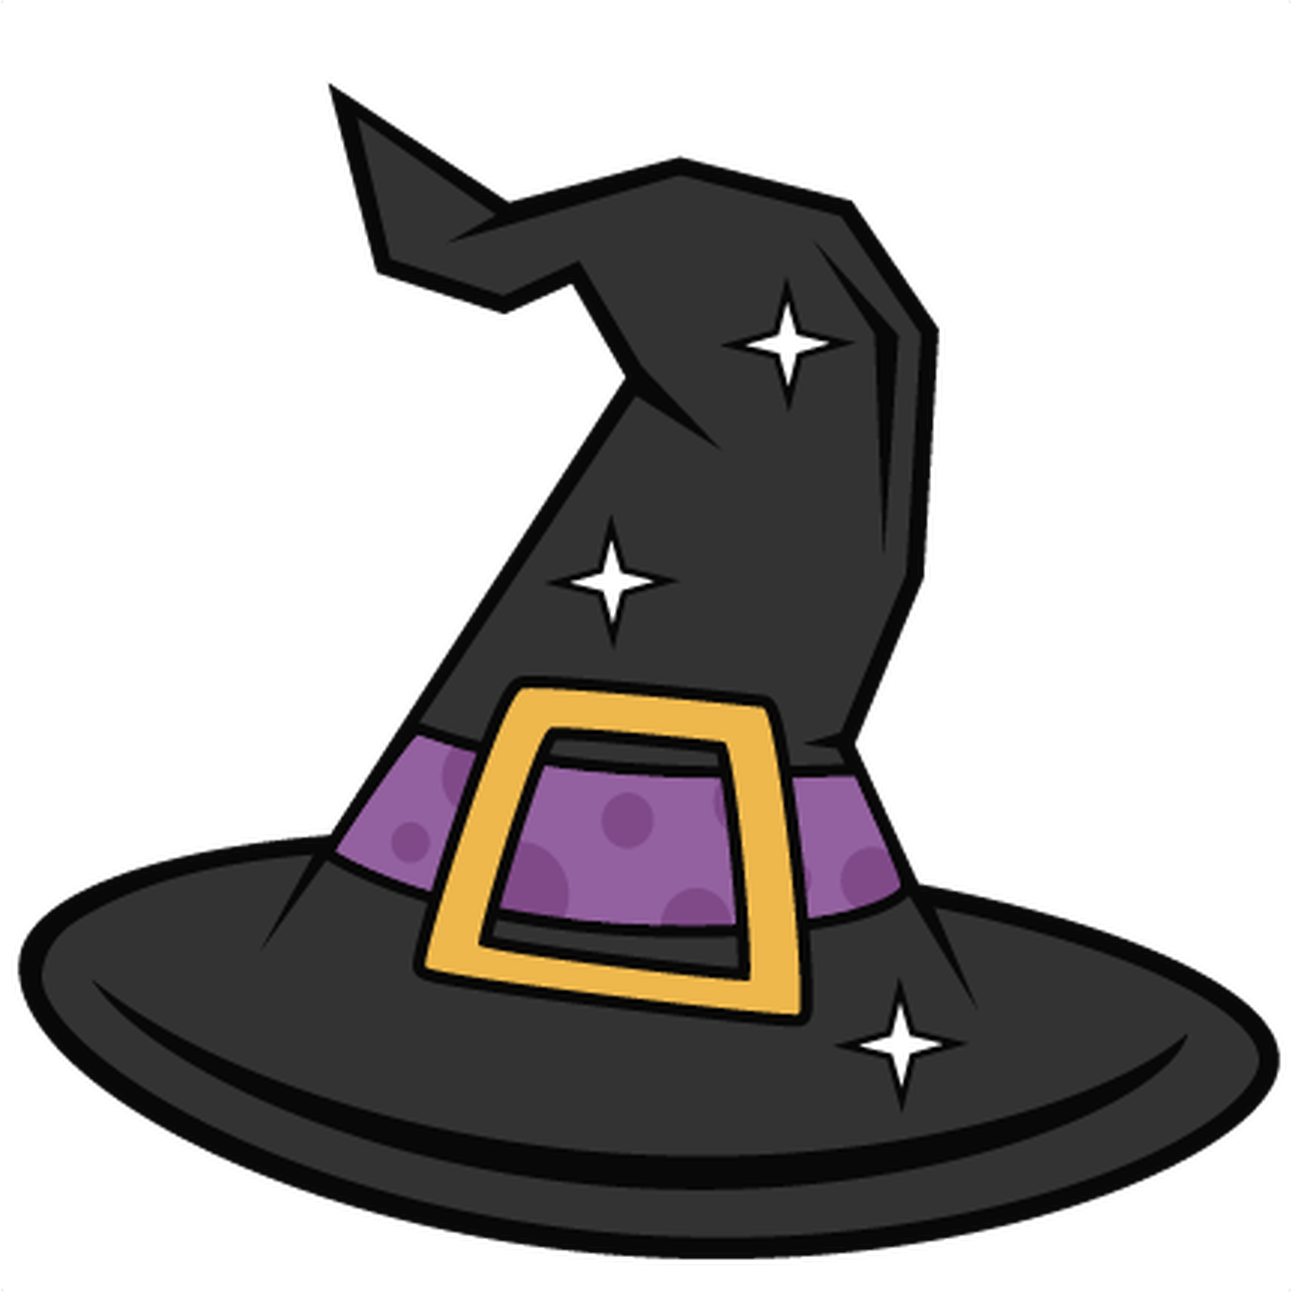 So Much Fun Paint An - Witch Hat Clipart Png.